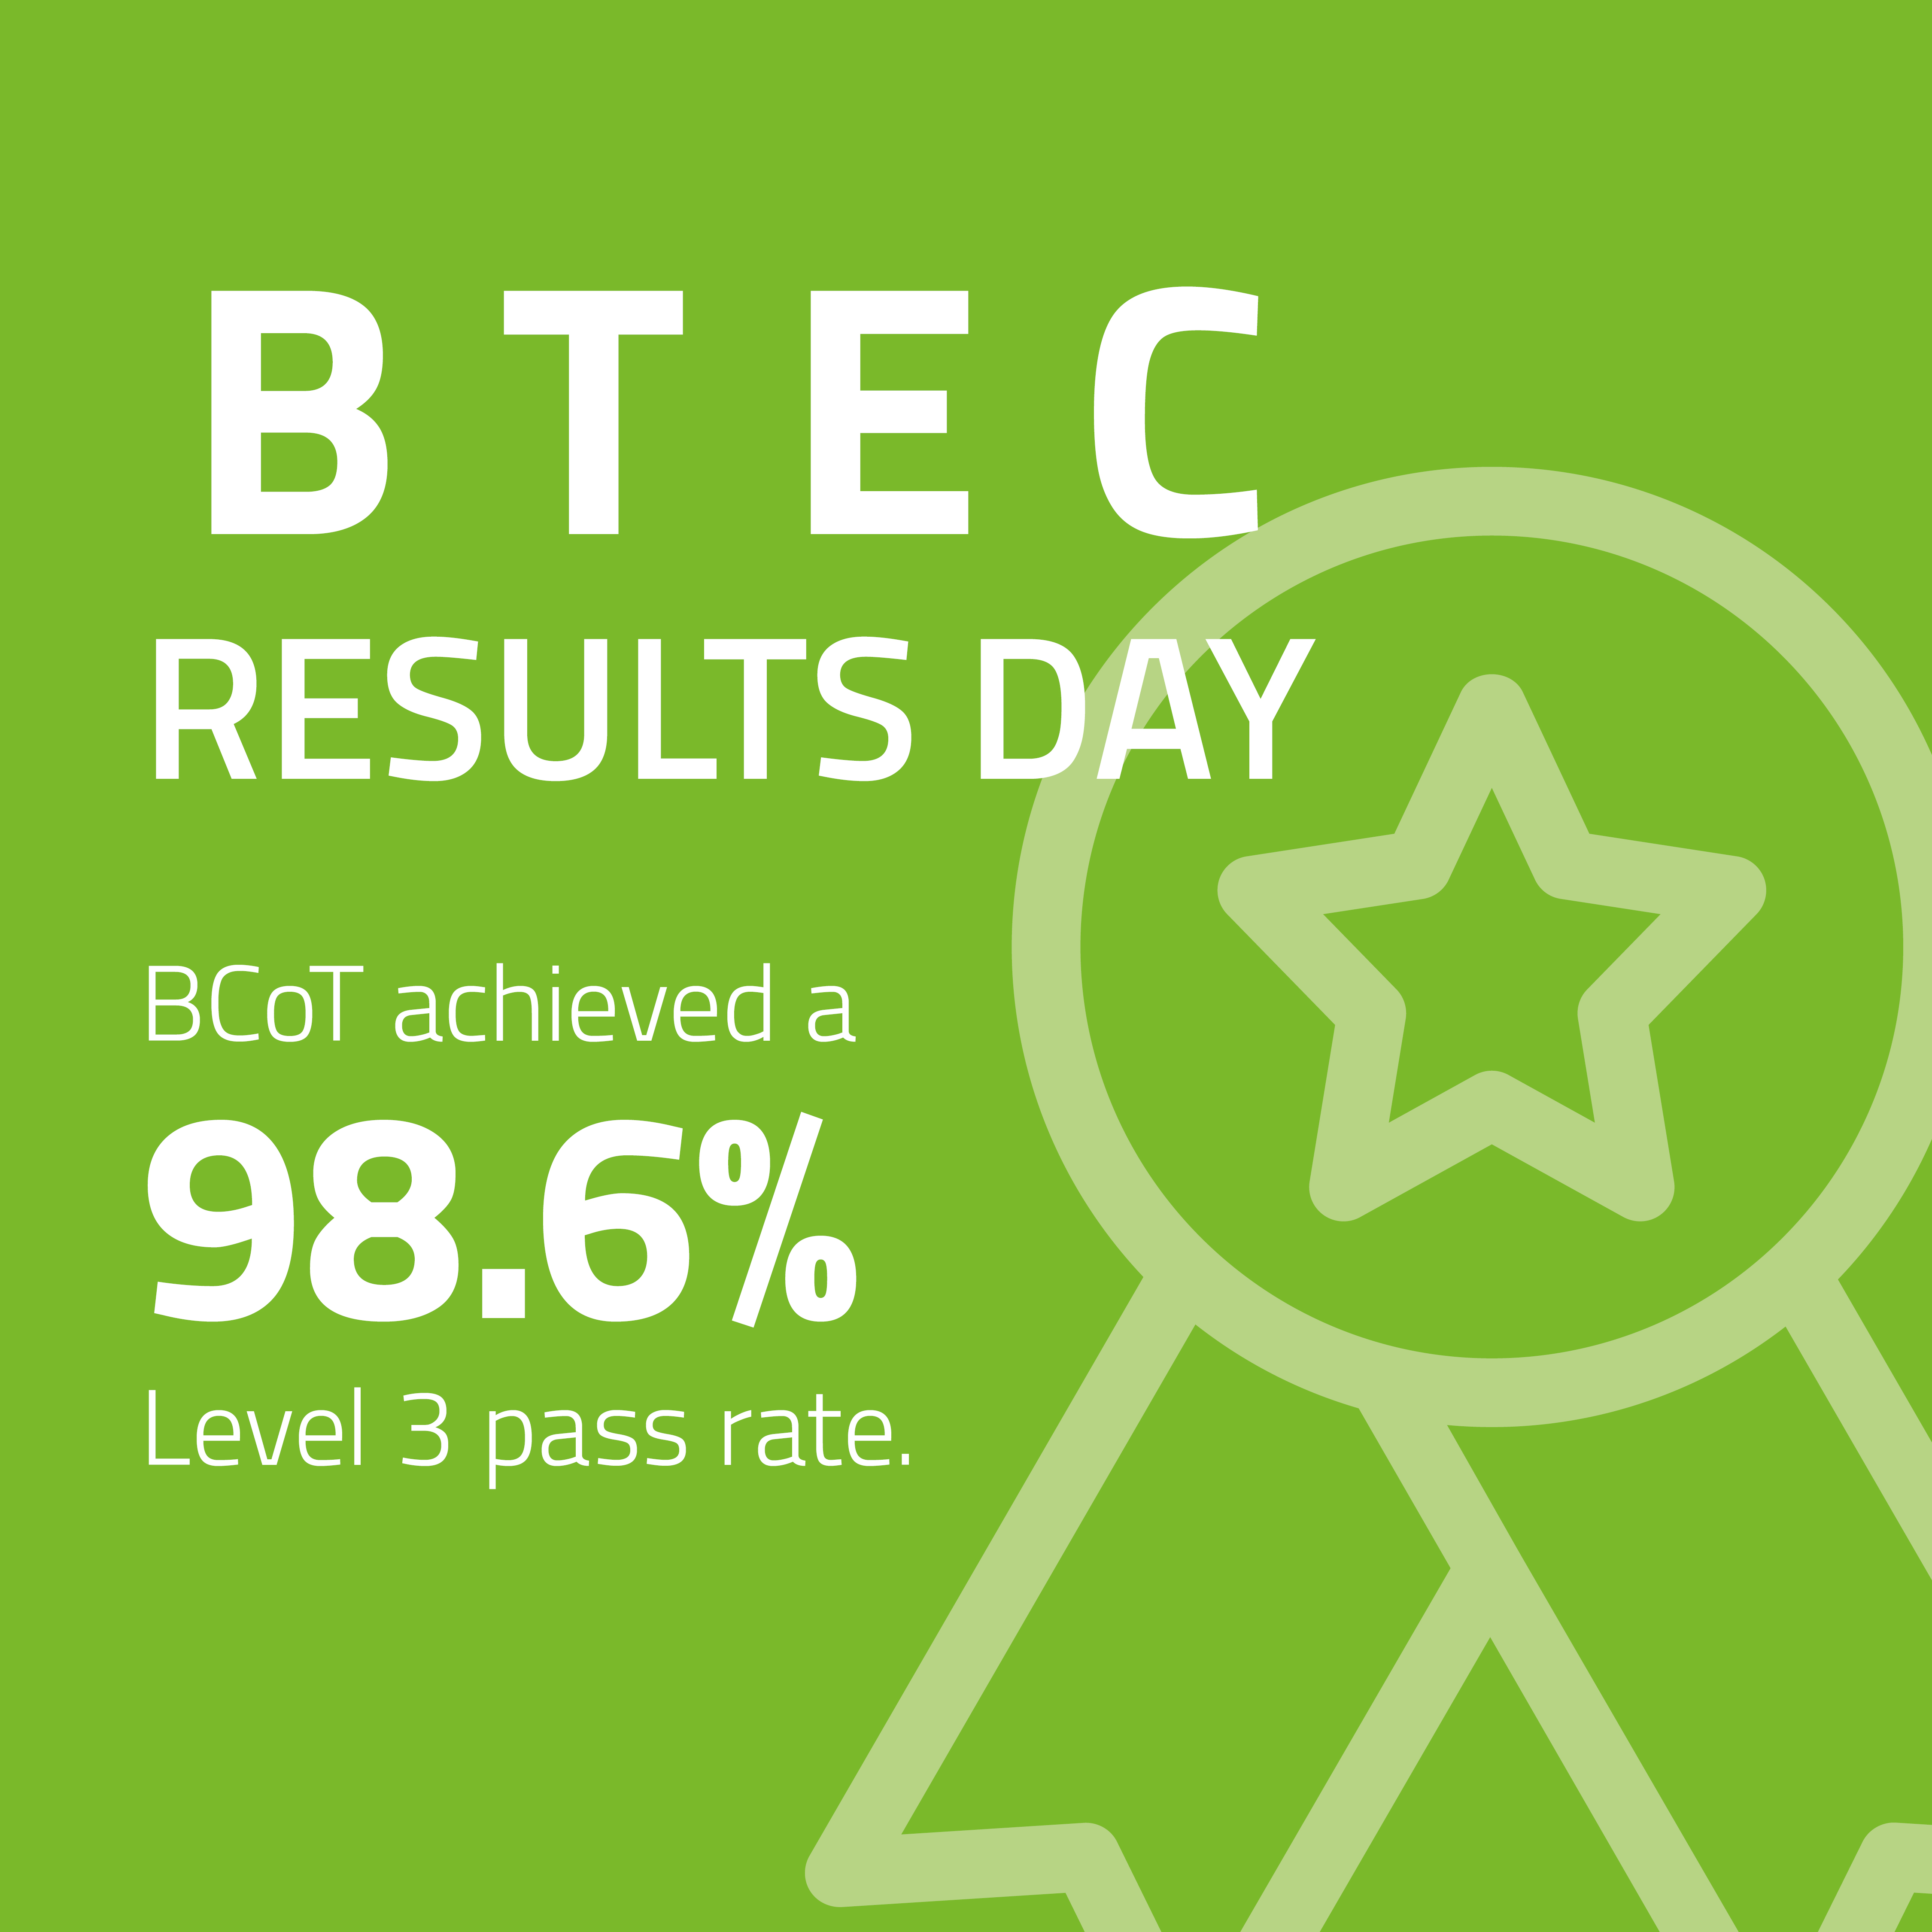 BTEC Results Day stat